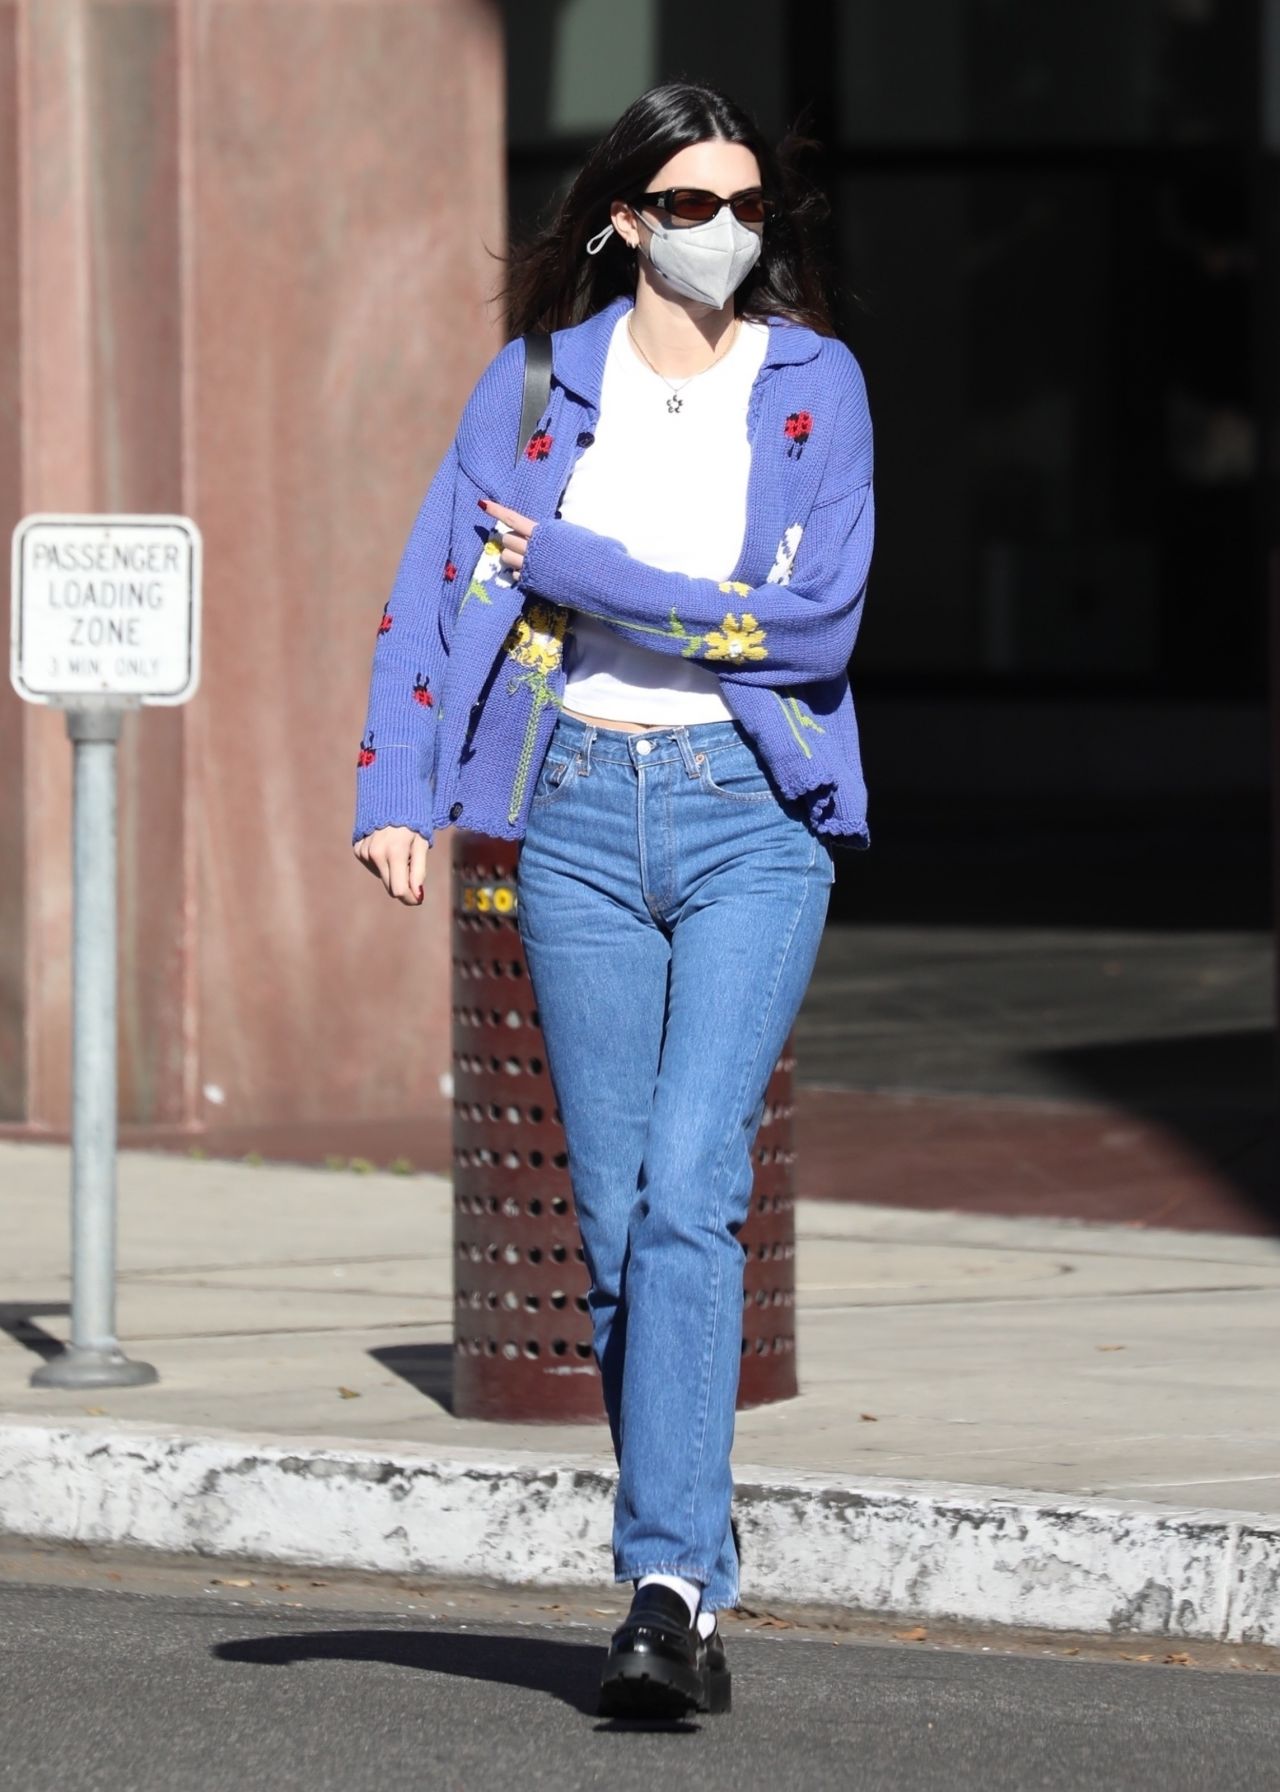 Kendall Jenner Los Angeles March 27, 2021 – Star Style